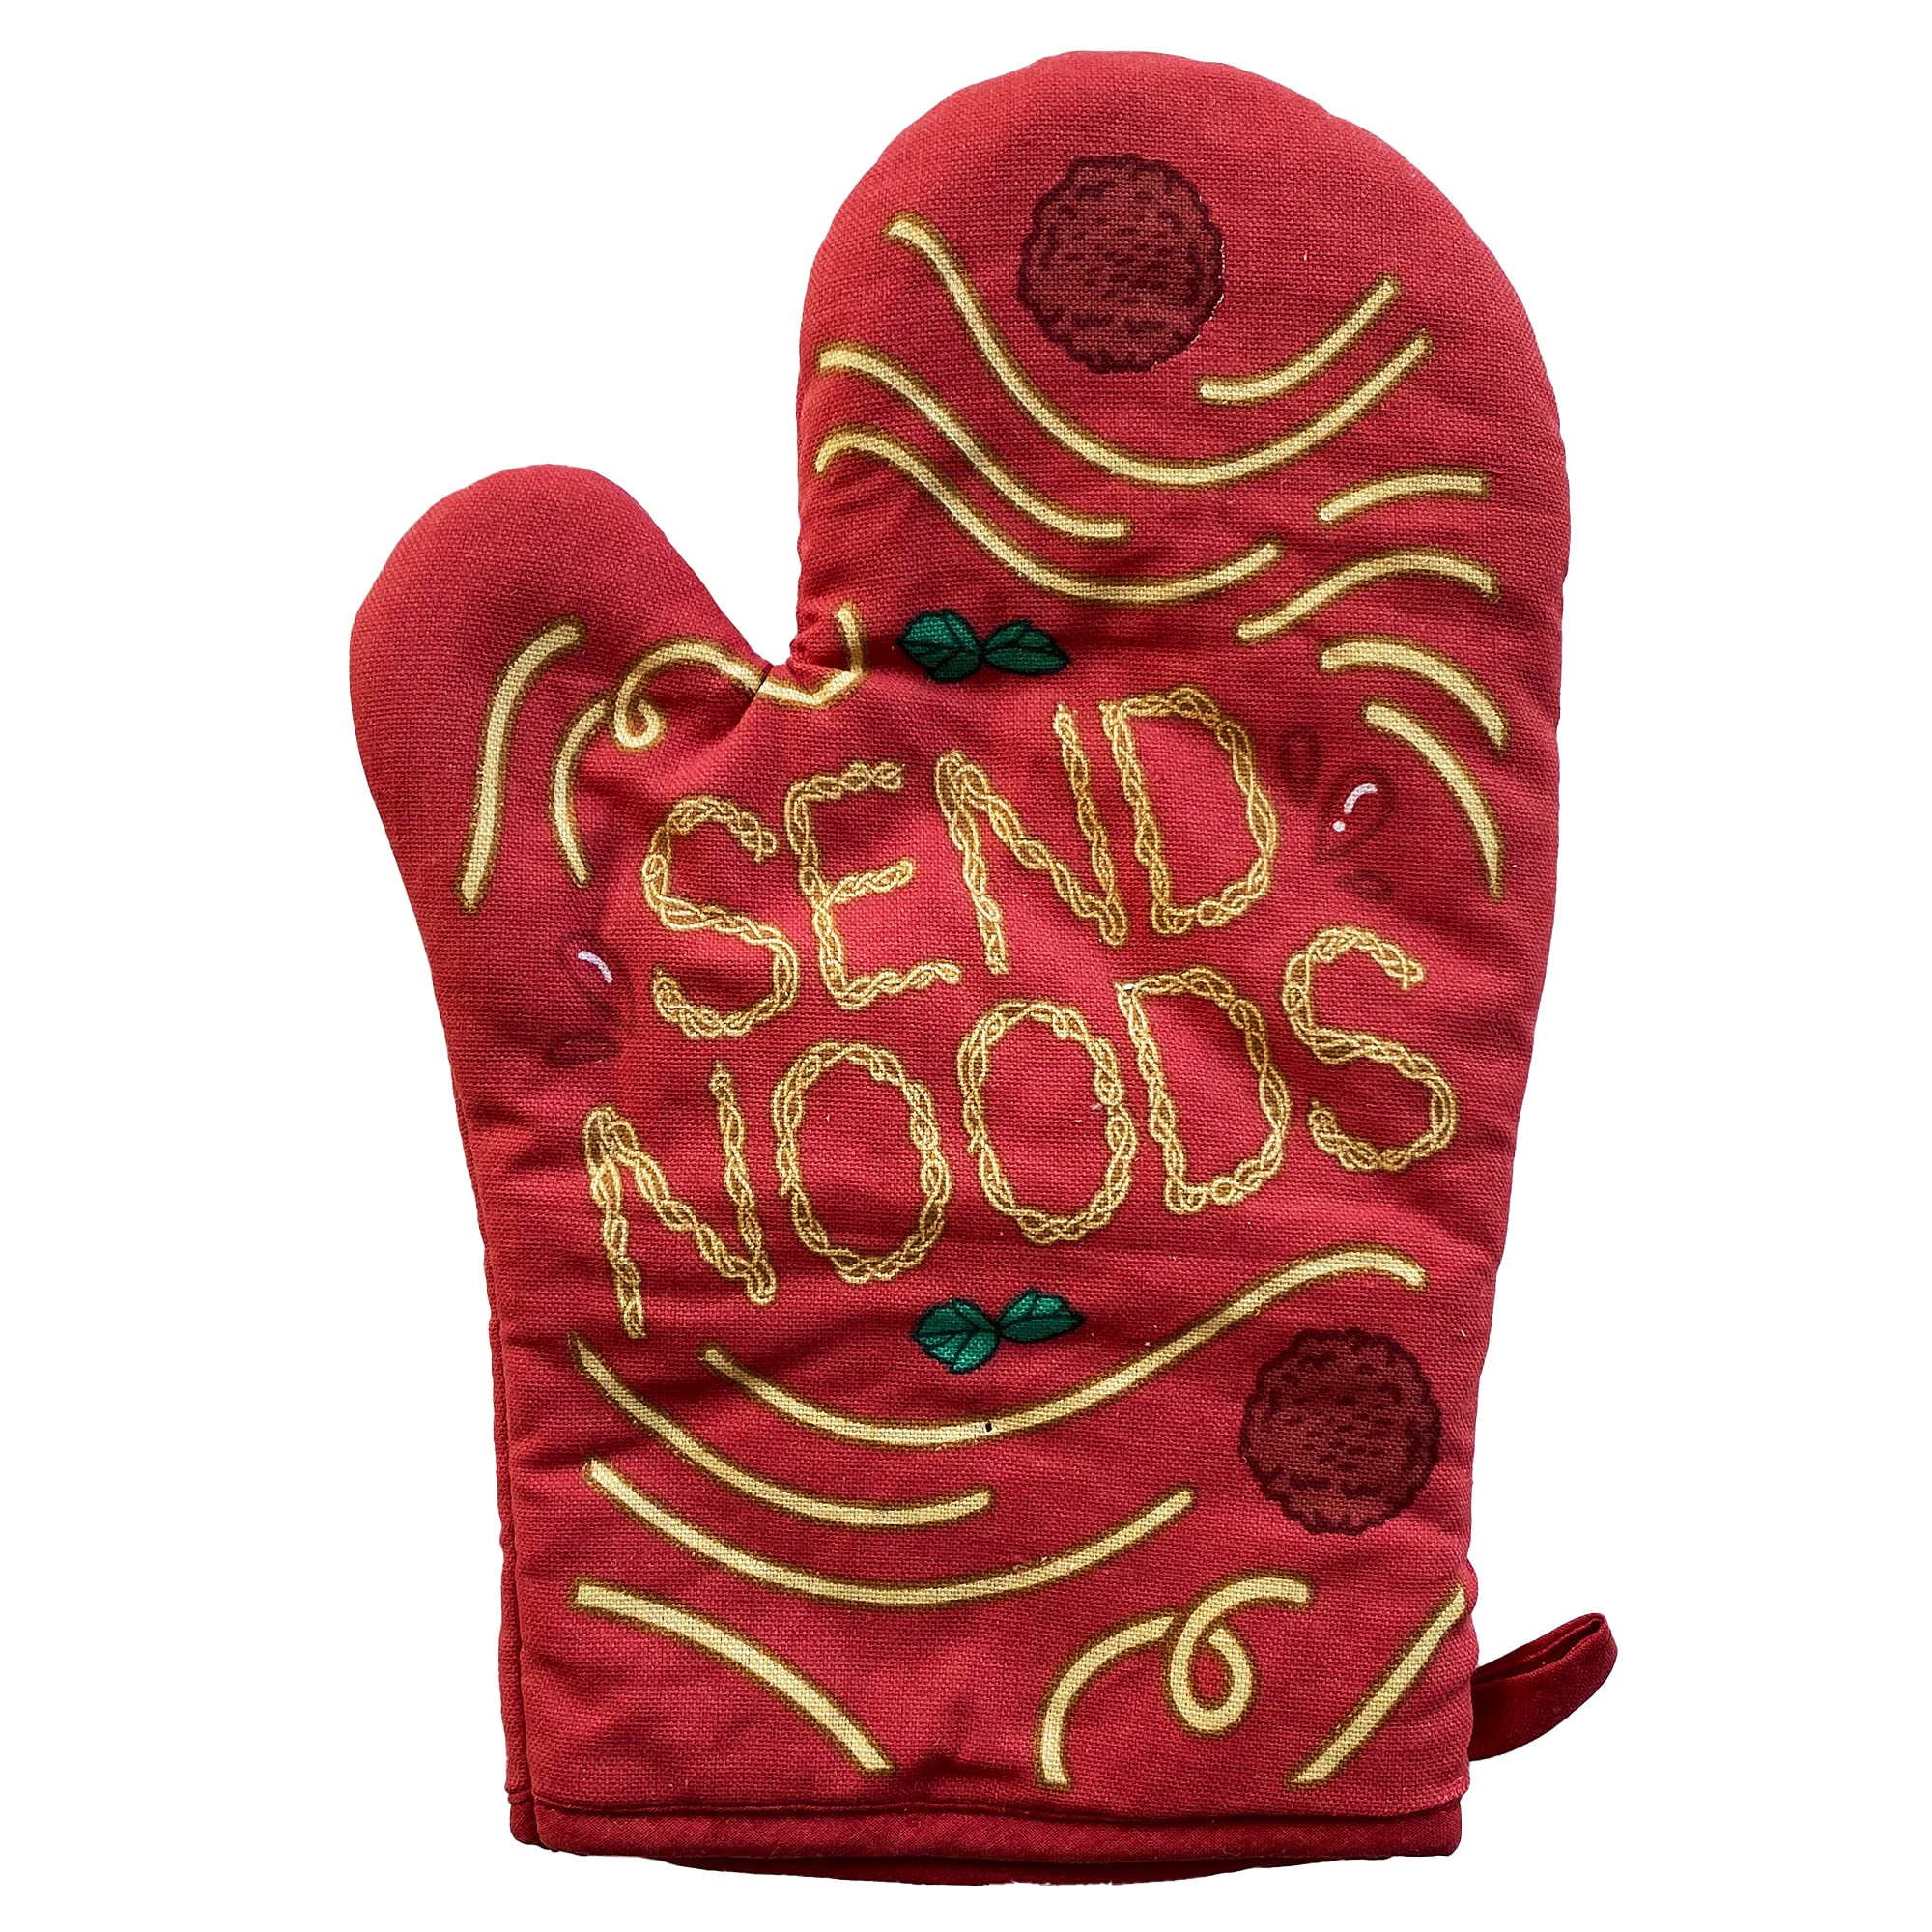 Send Noods Apron Oven Mitt Funny Noodle Cooking Graphic Novelty Kitchen Smock Funny Graphic Kitchenwear Adult Humor Funny Food Novelty Cookware Red Oven Mitt